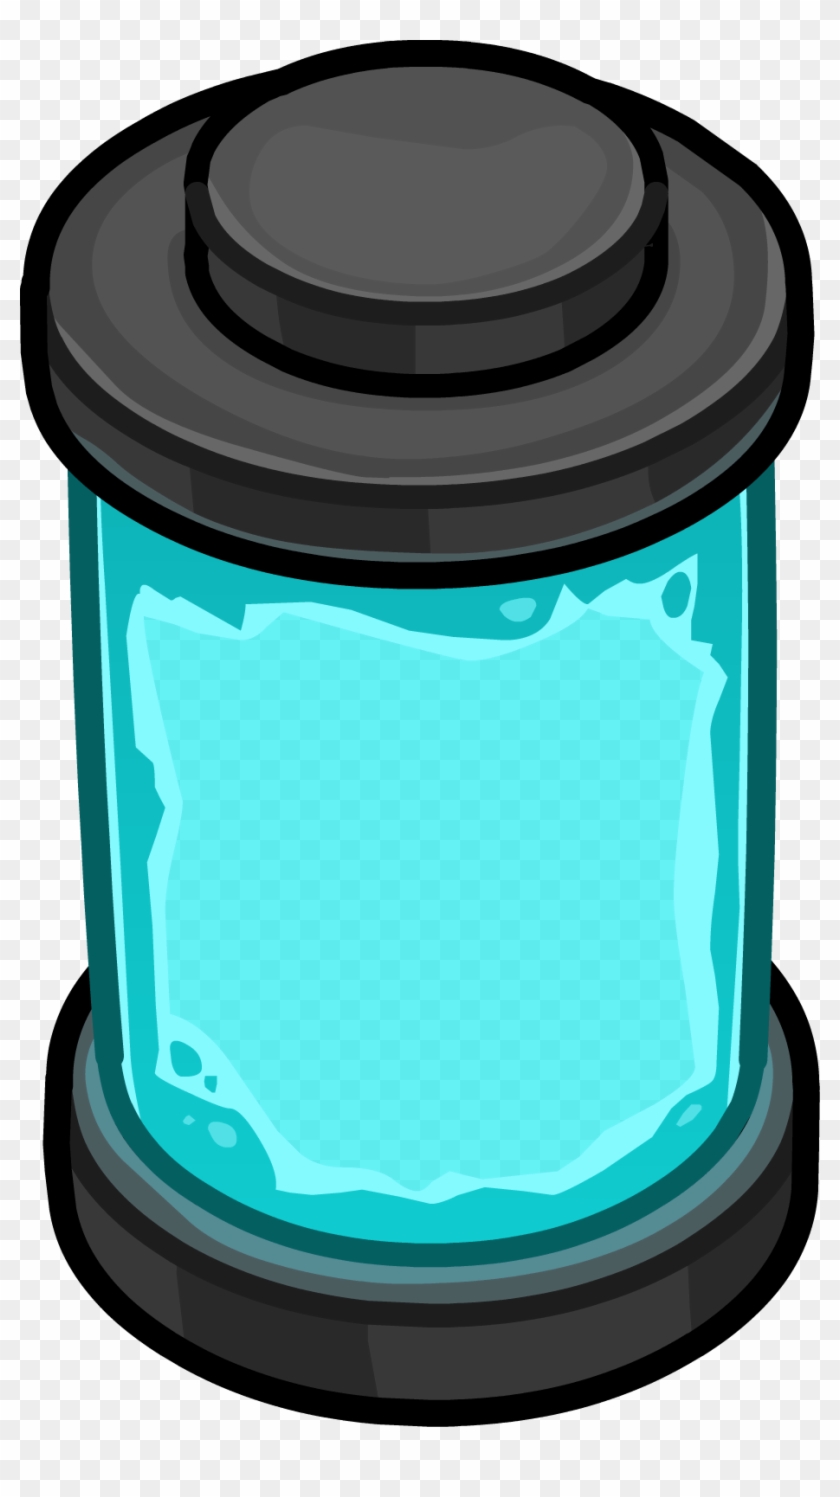 Containment Cell - Club Penguin Containment Cell #1273849